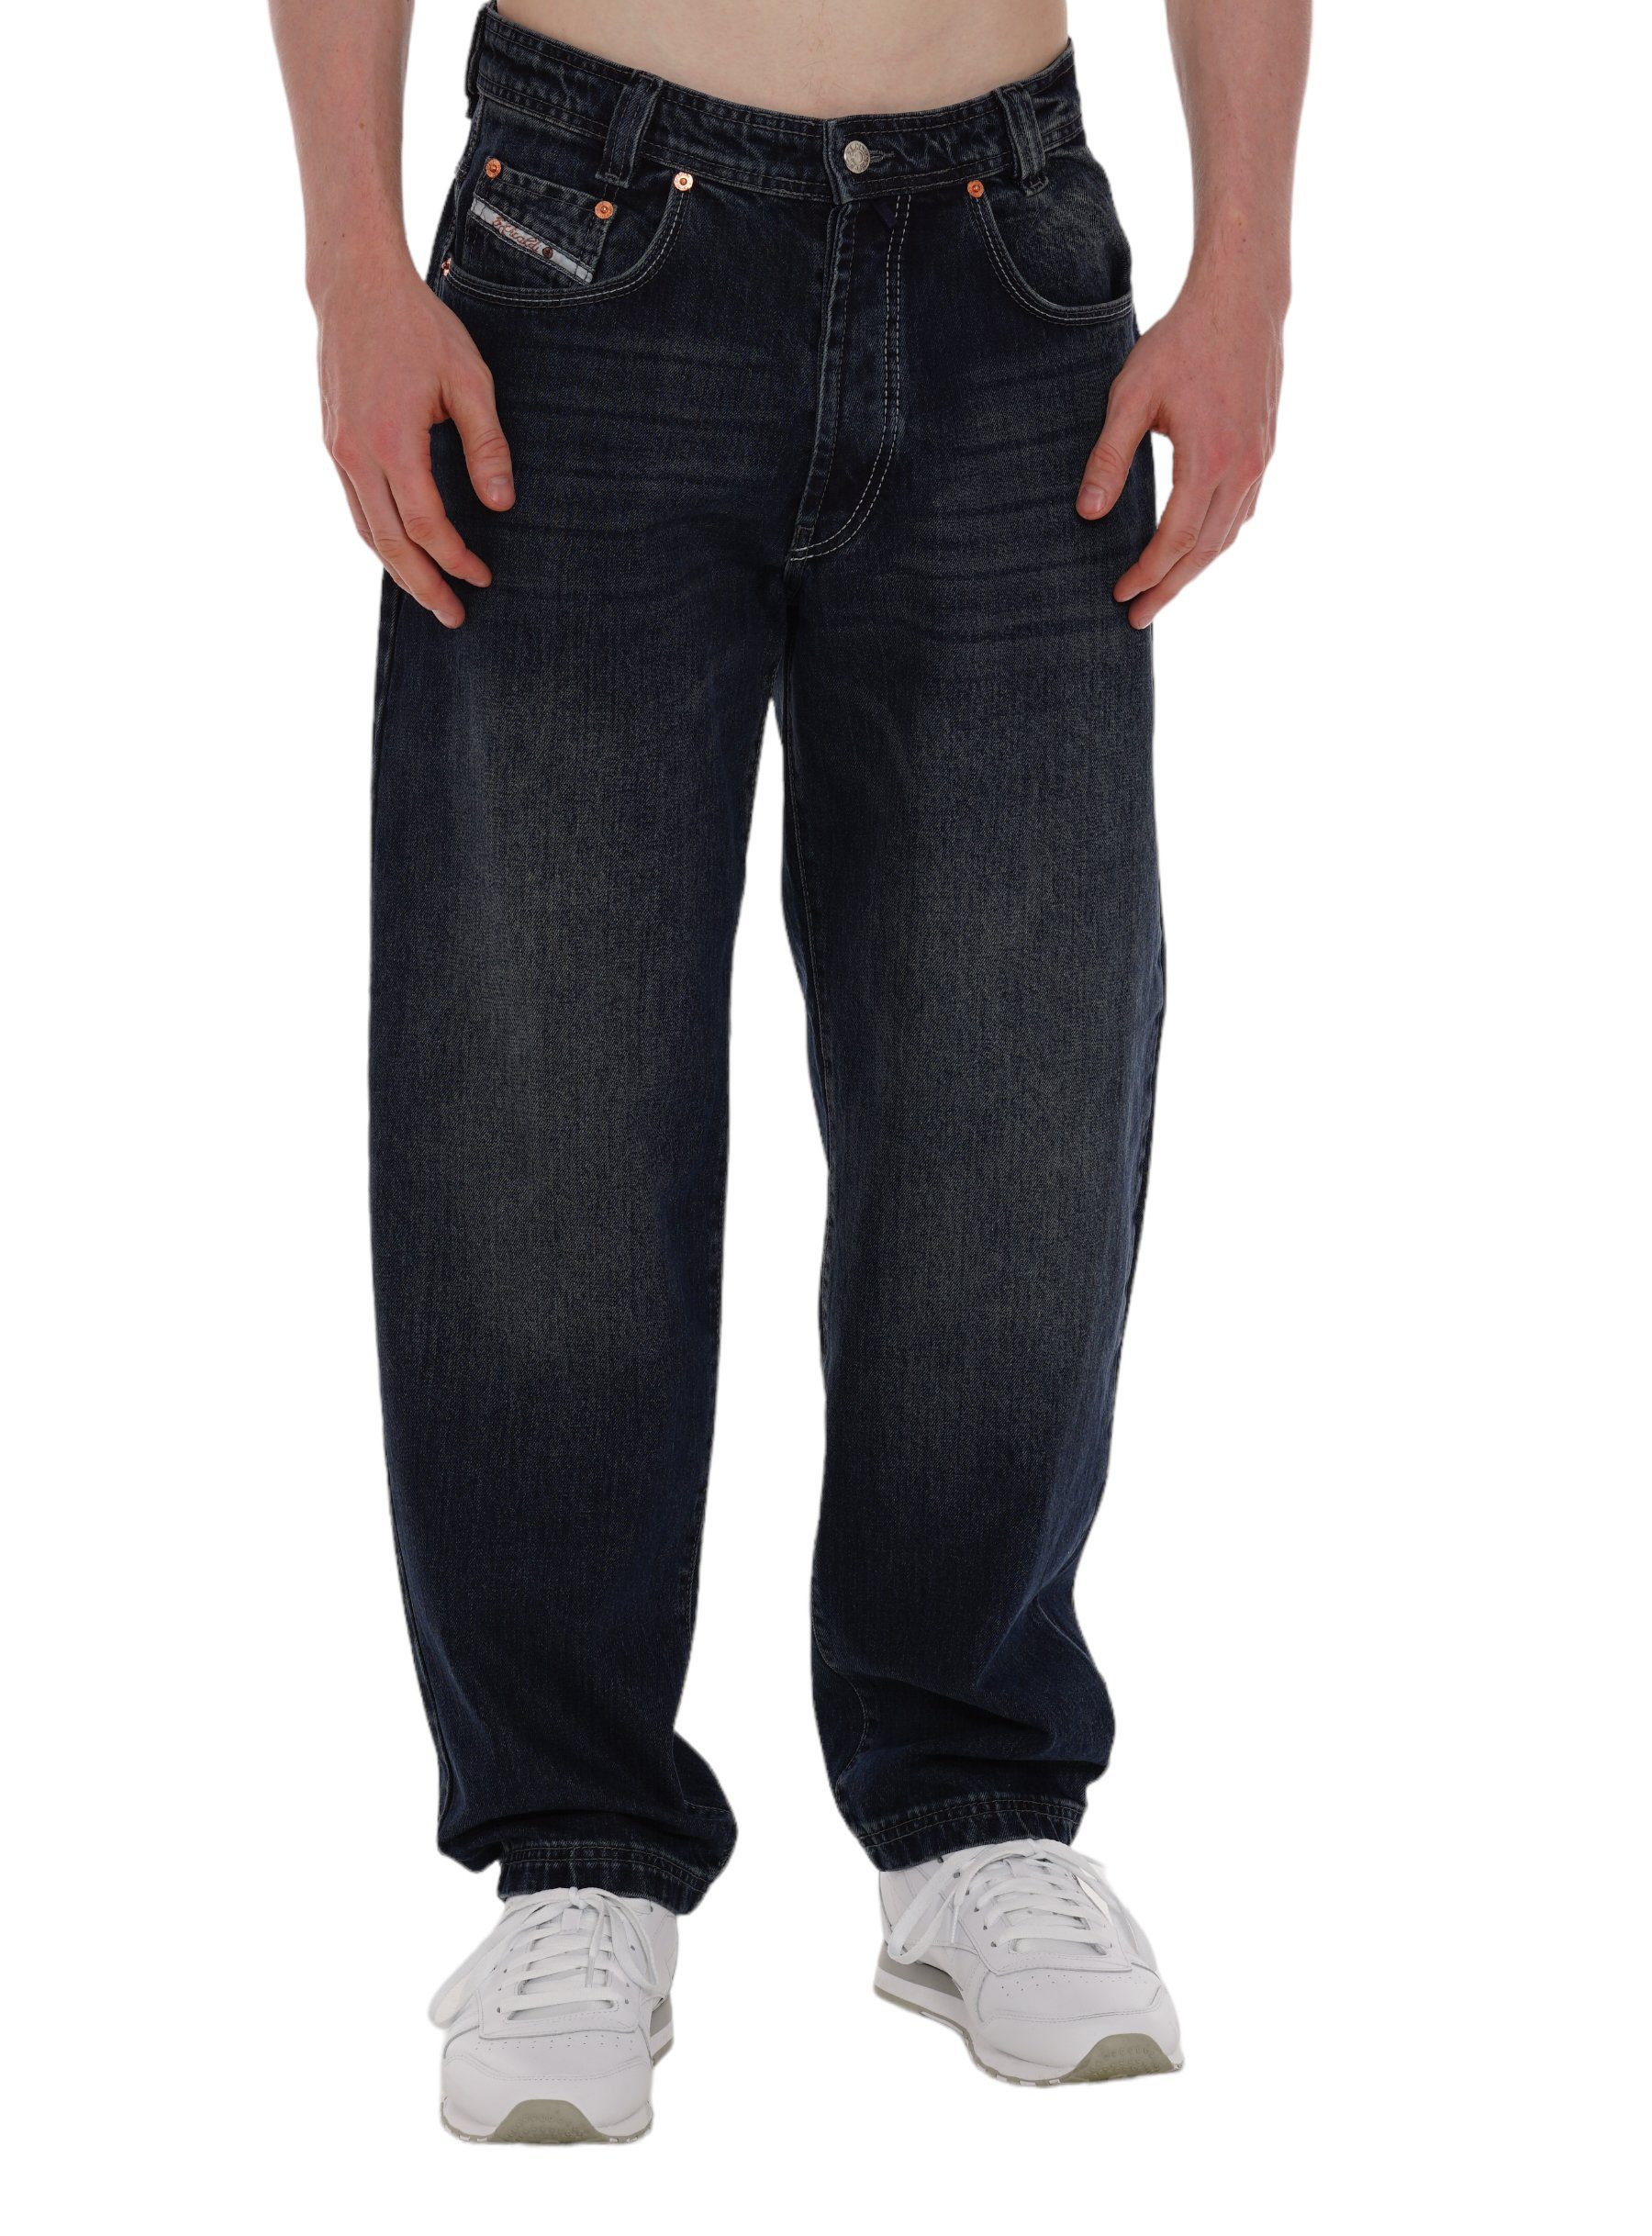 Loose Weite Jeans PICALDI Five 471 Fit, Jeans Pocket Jeans Zicco Miracle